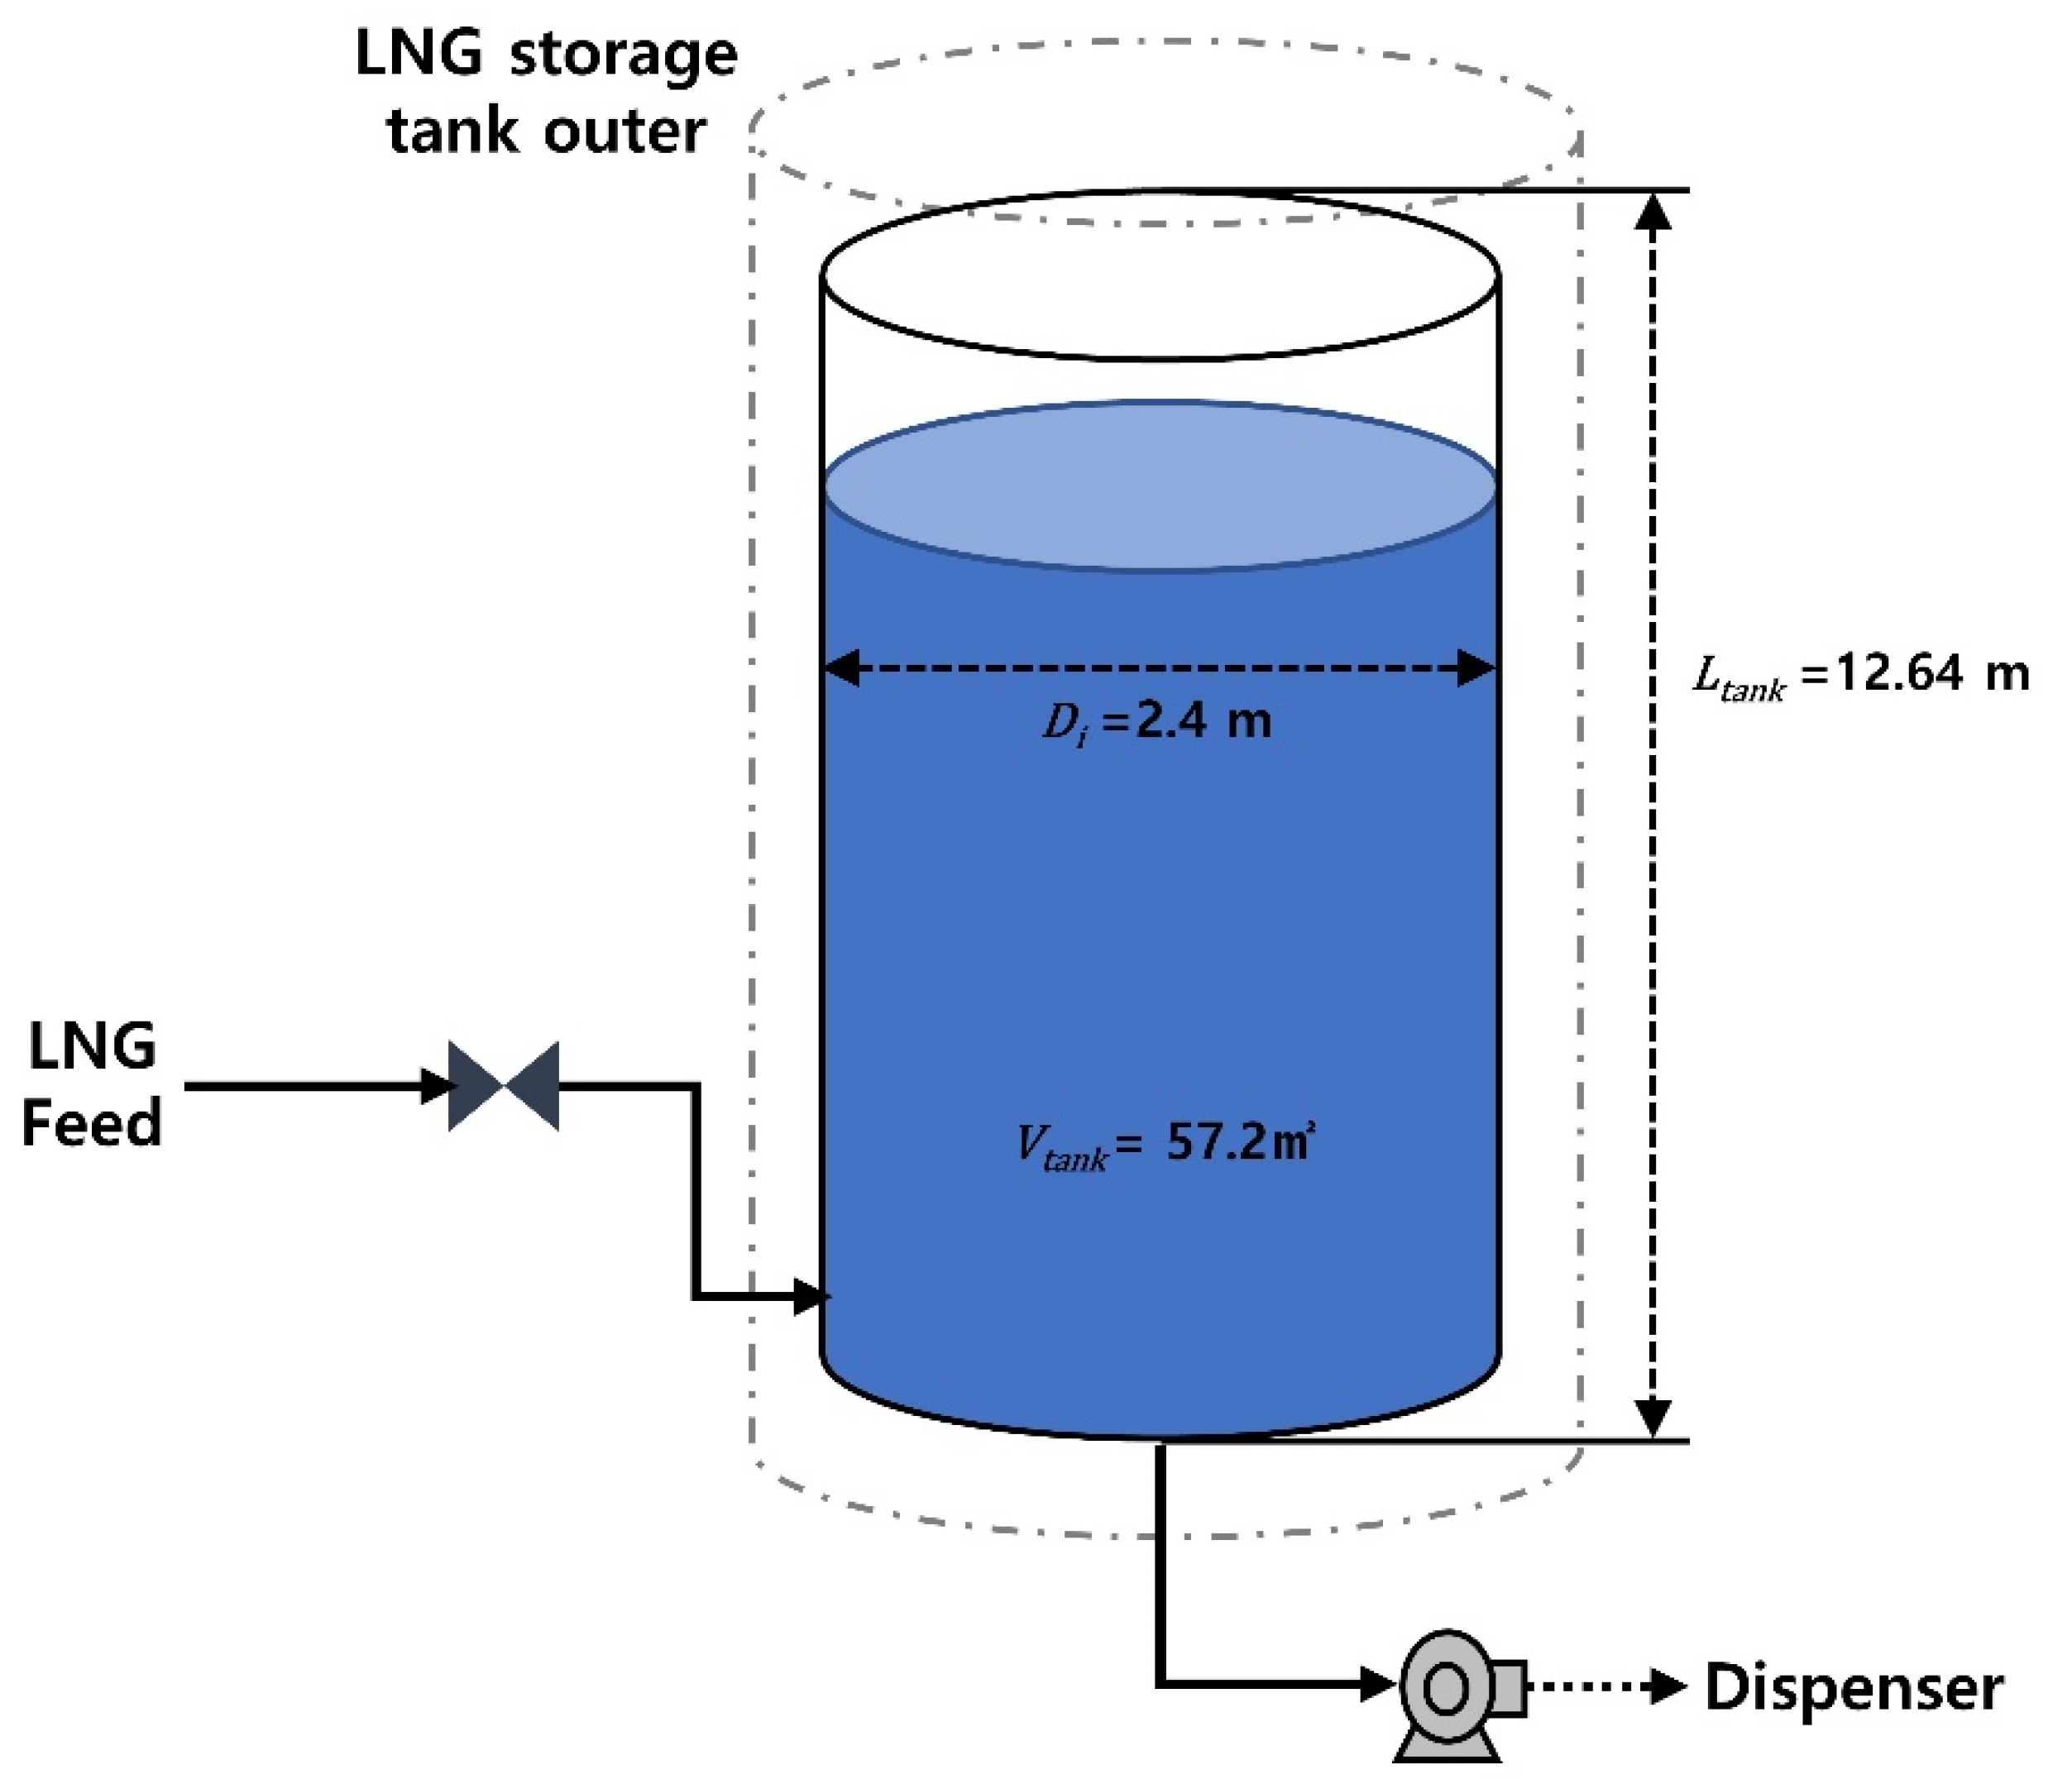 Energies | Free Full-Text | An Economical Boil-Off Gas Management System  for LNG Refueling Stations: Evaluation Using Scenario Analysis